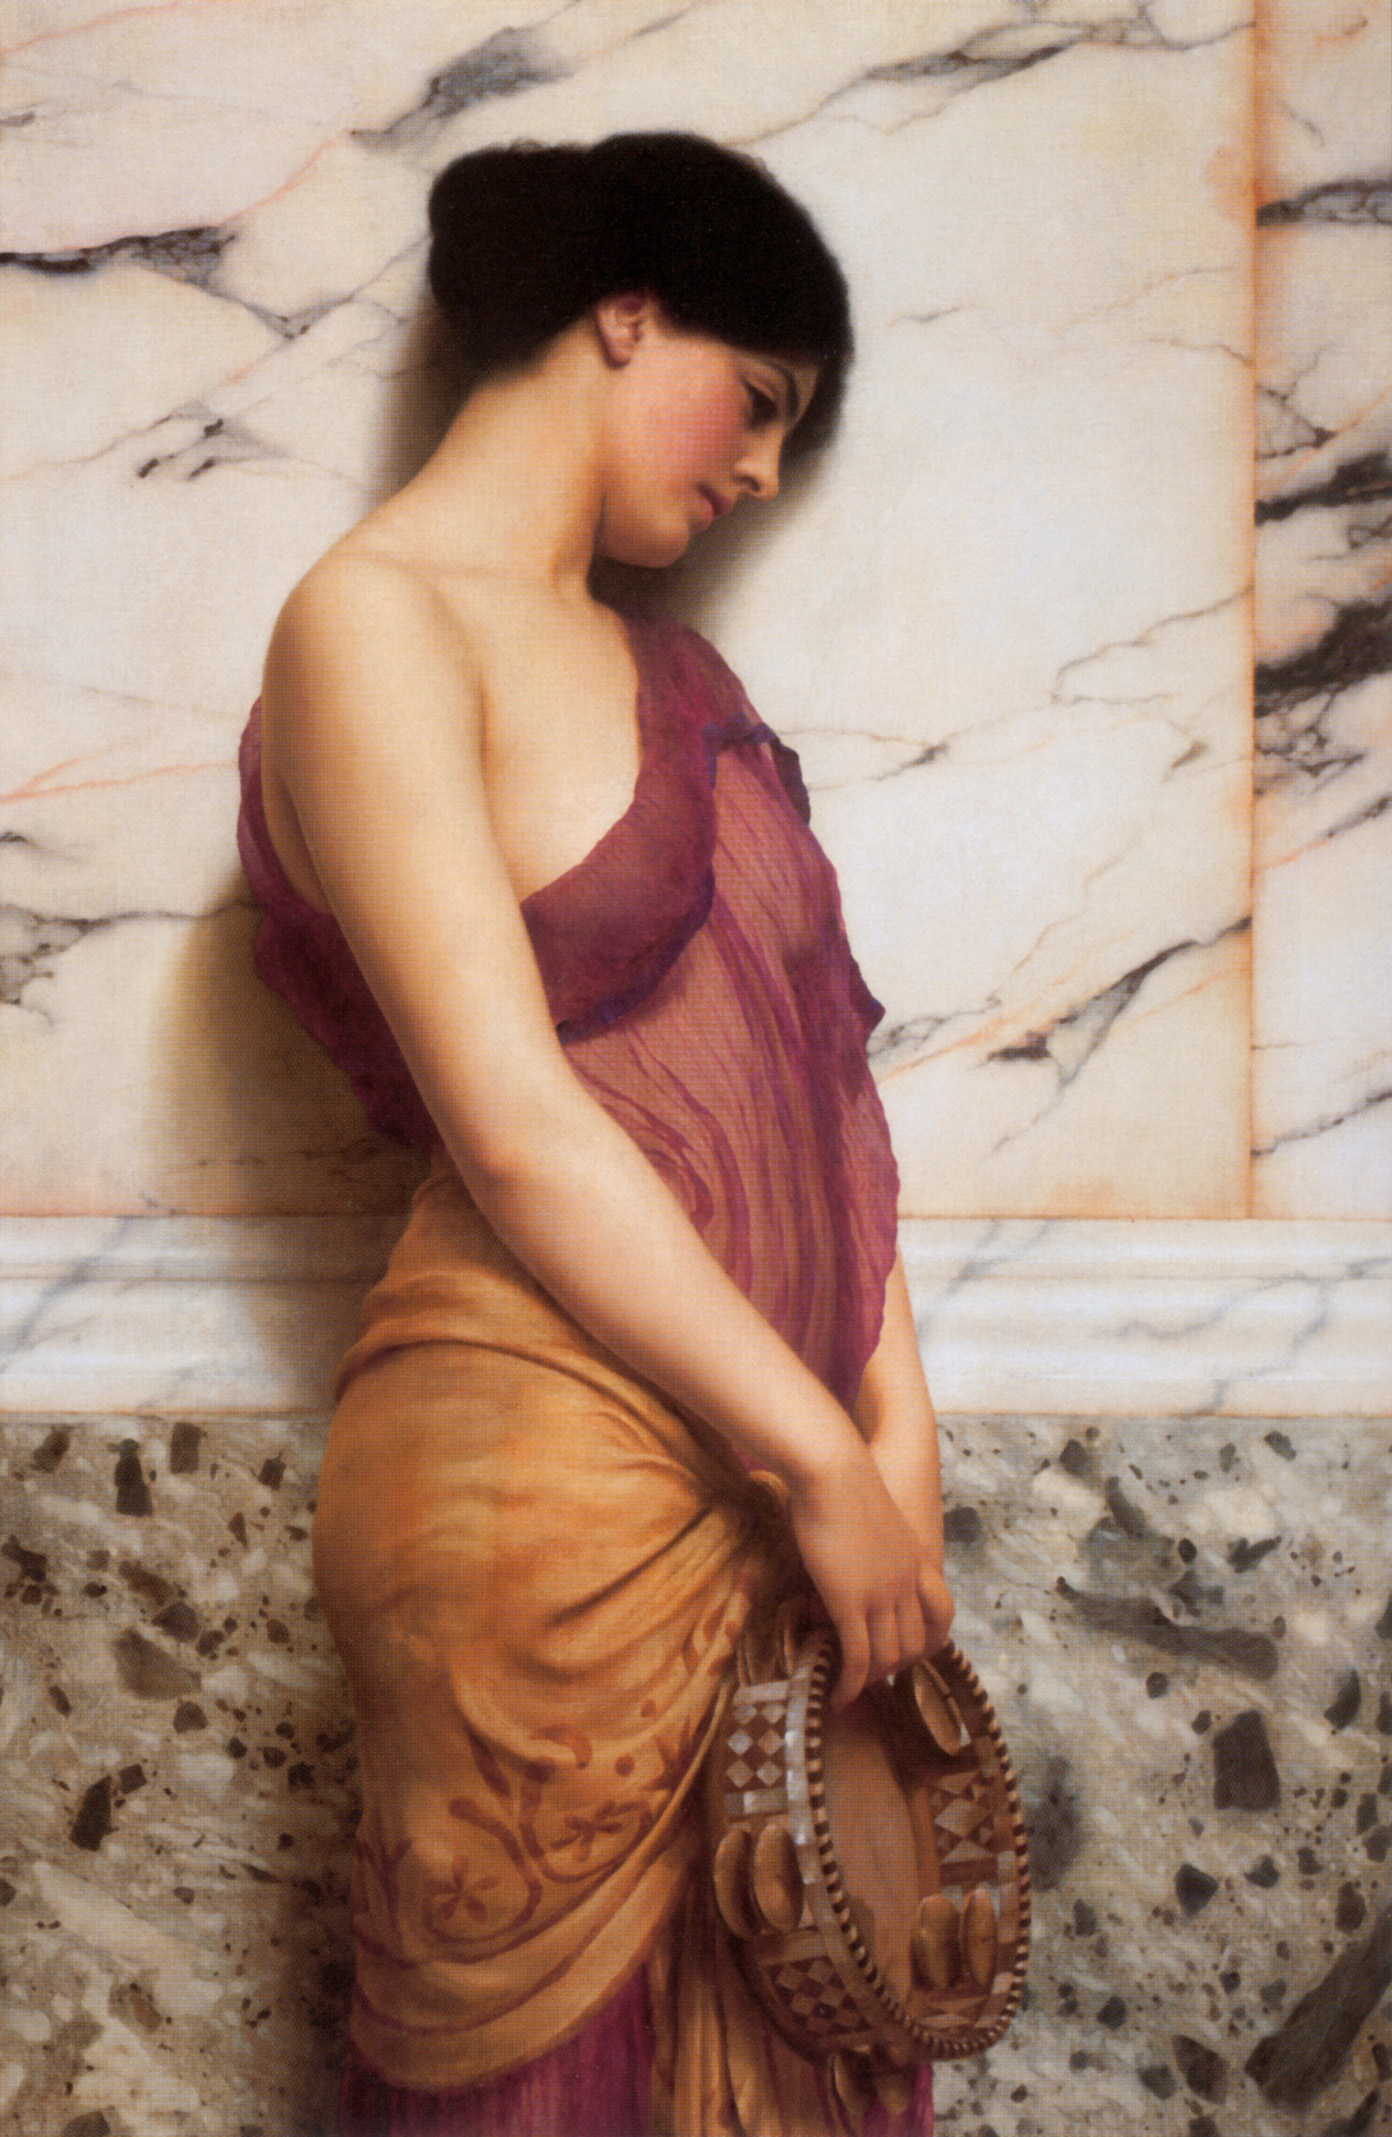 The Tambourine Girl by John William Godward - 1908 - 114.5 × 76 cm private collection